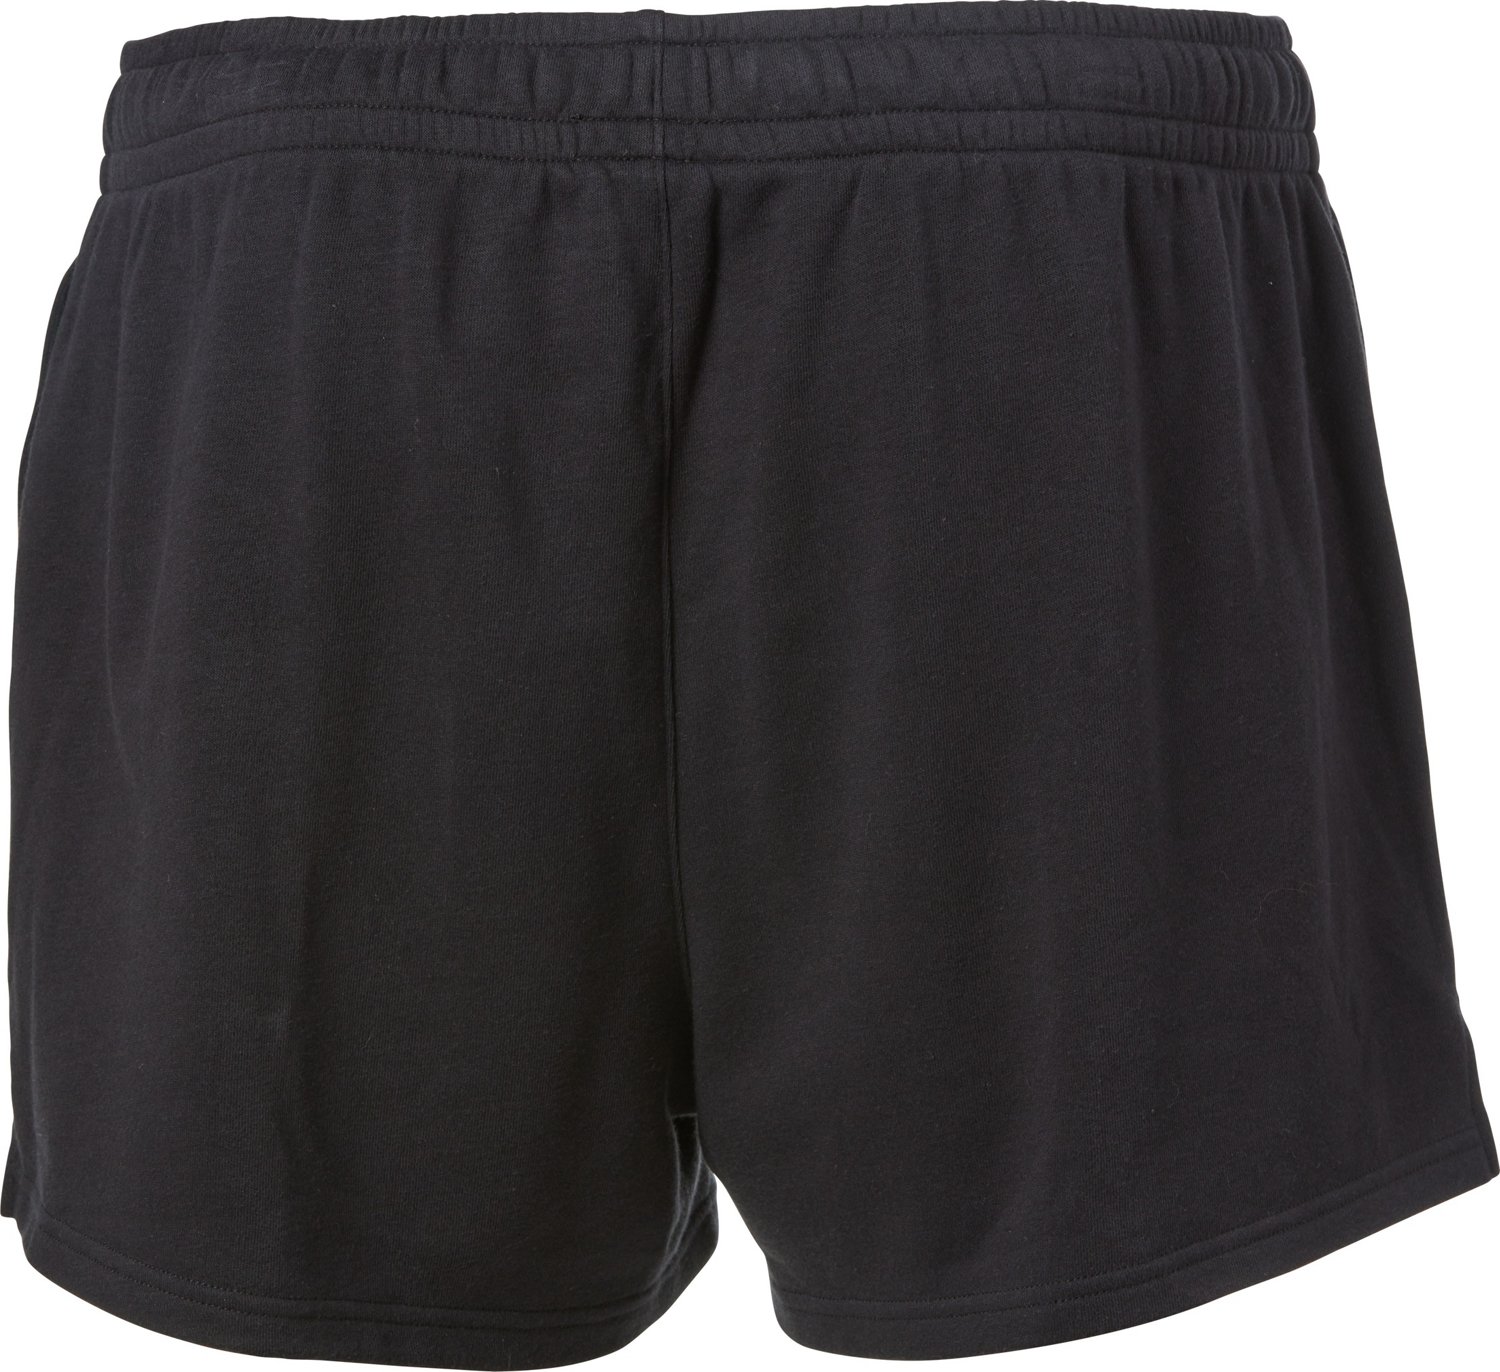 Alleson Ahtletic Adult Adult Training Shorts with Pockets 